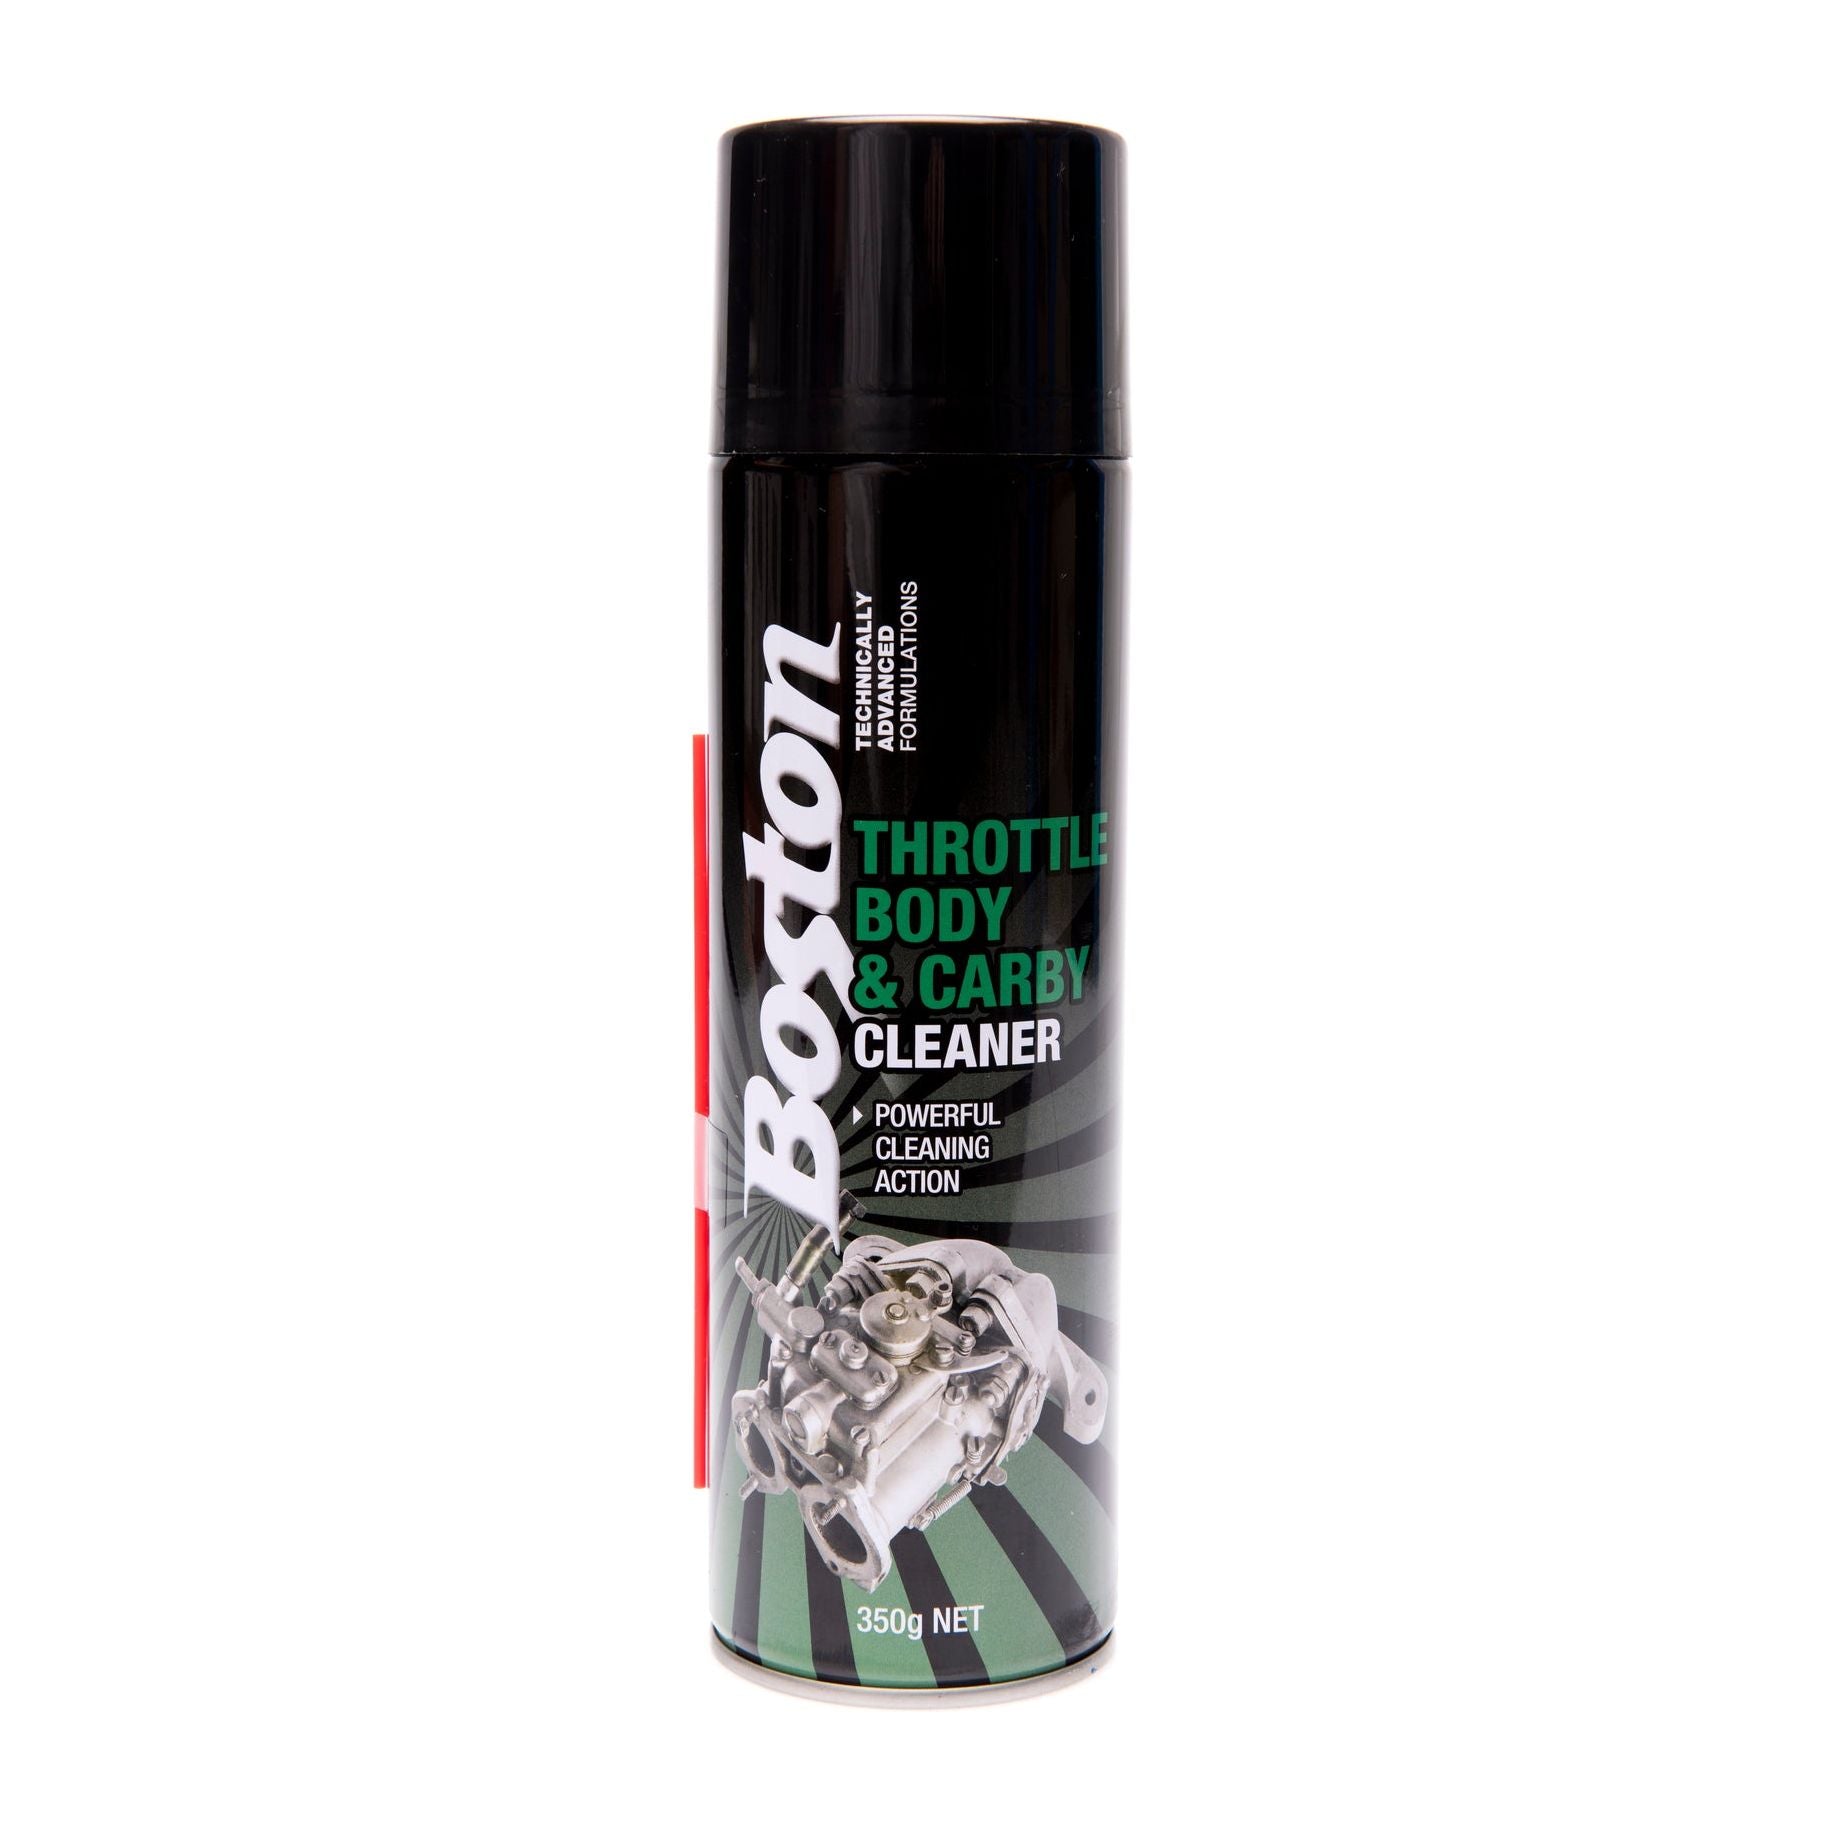 BOSTON THROTTLE BODY CARBY CLEANER 350GM | 78100 - South East Clearance Centre